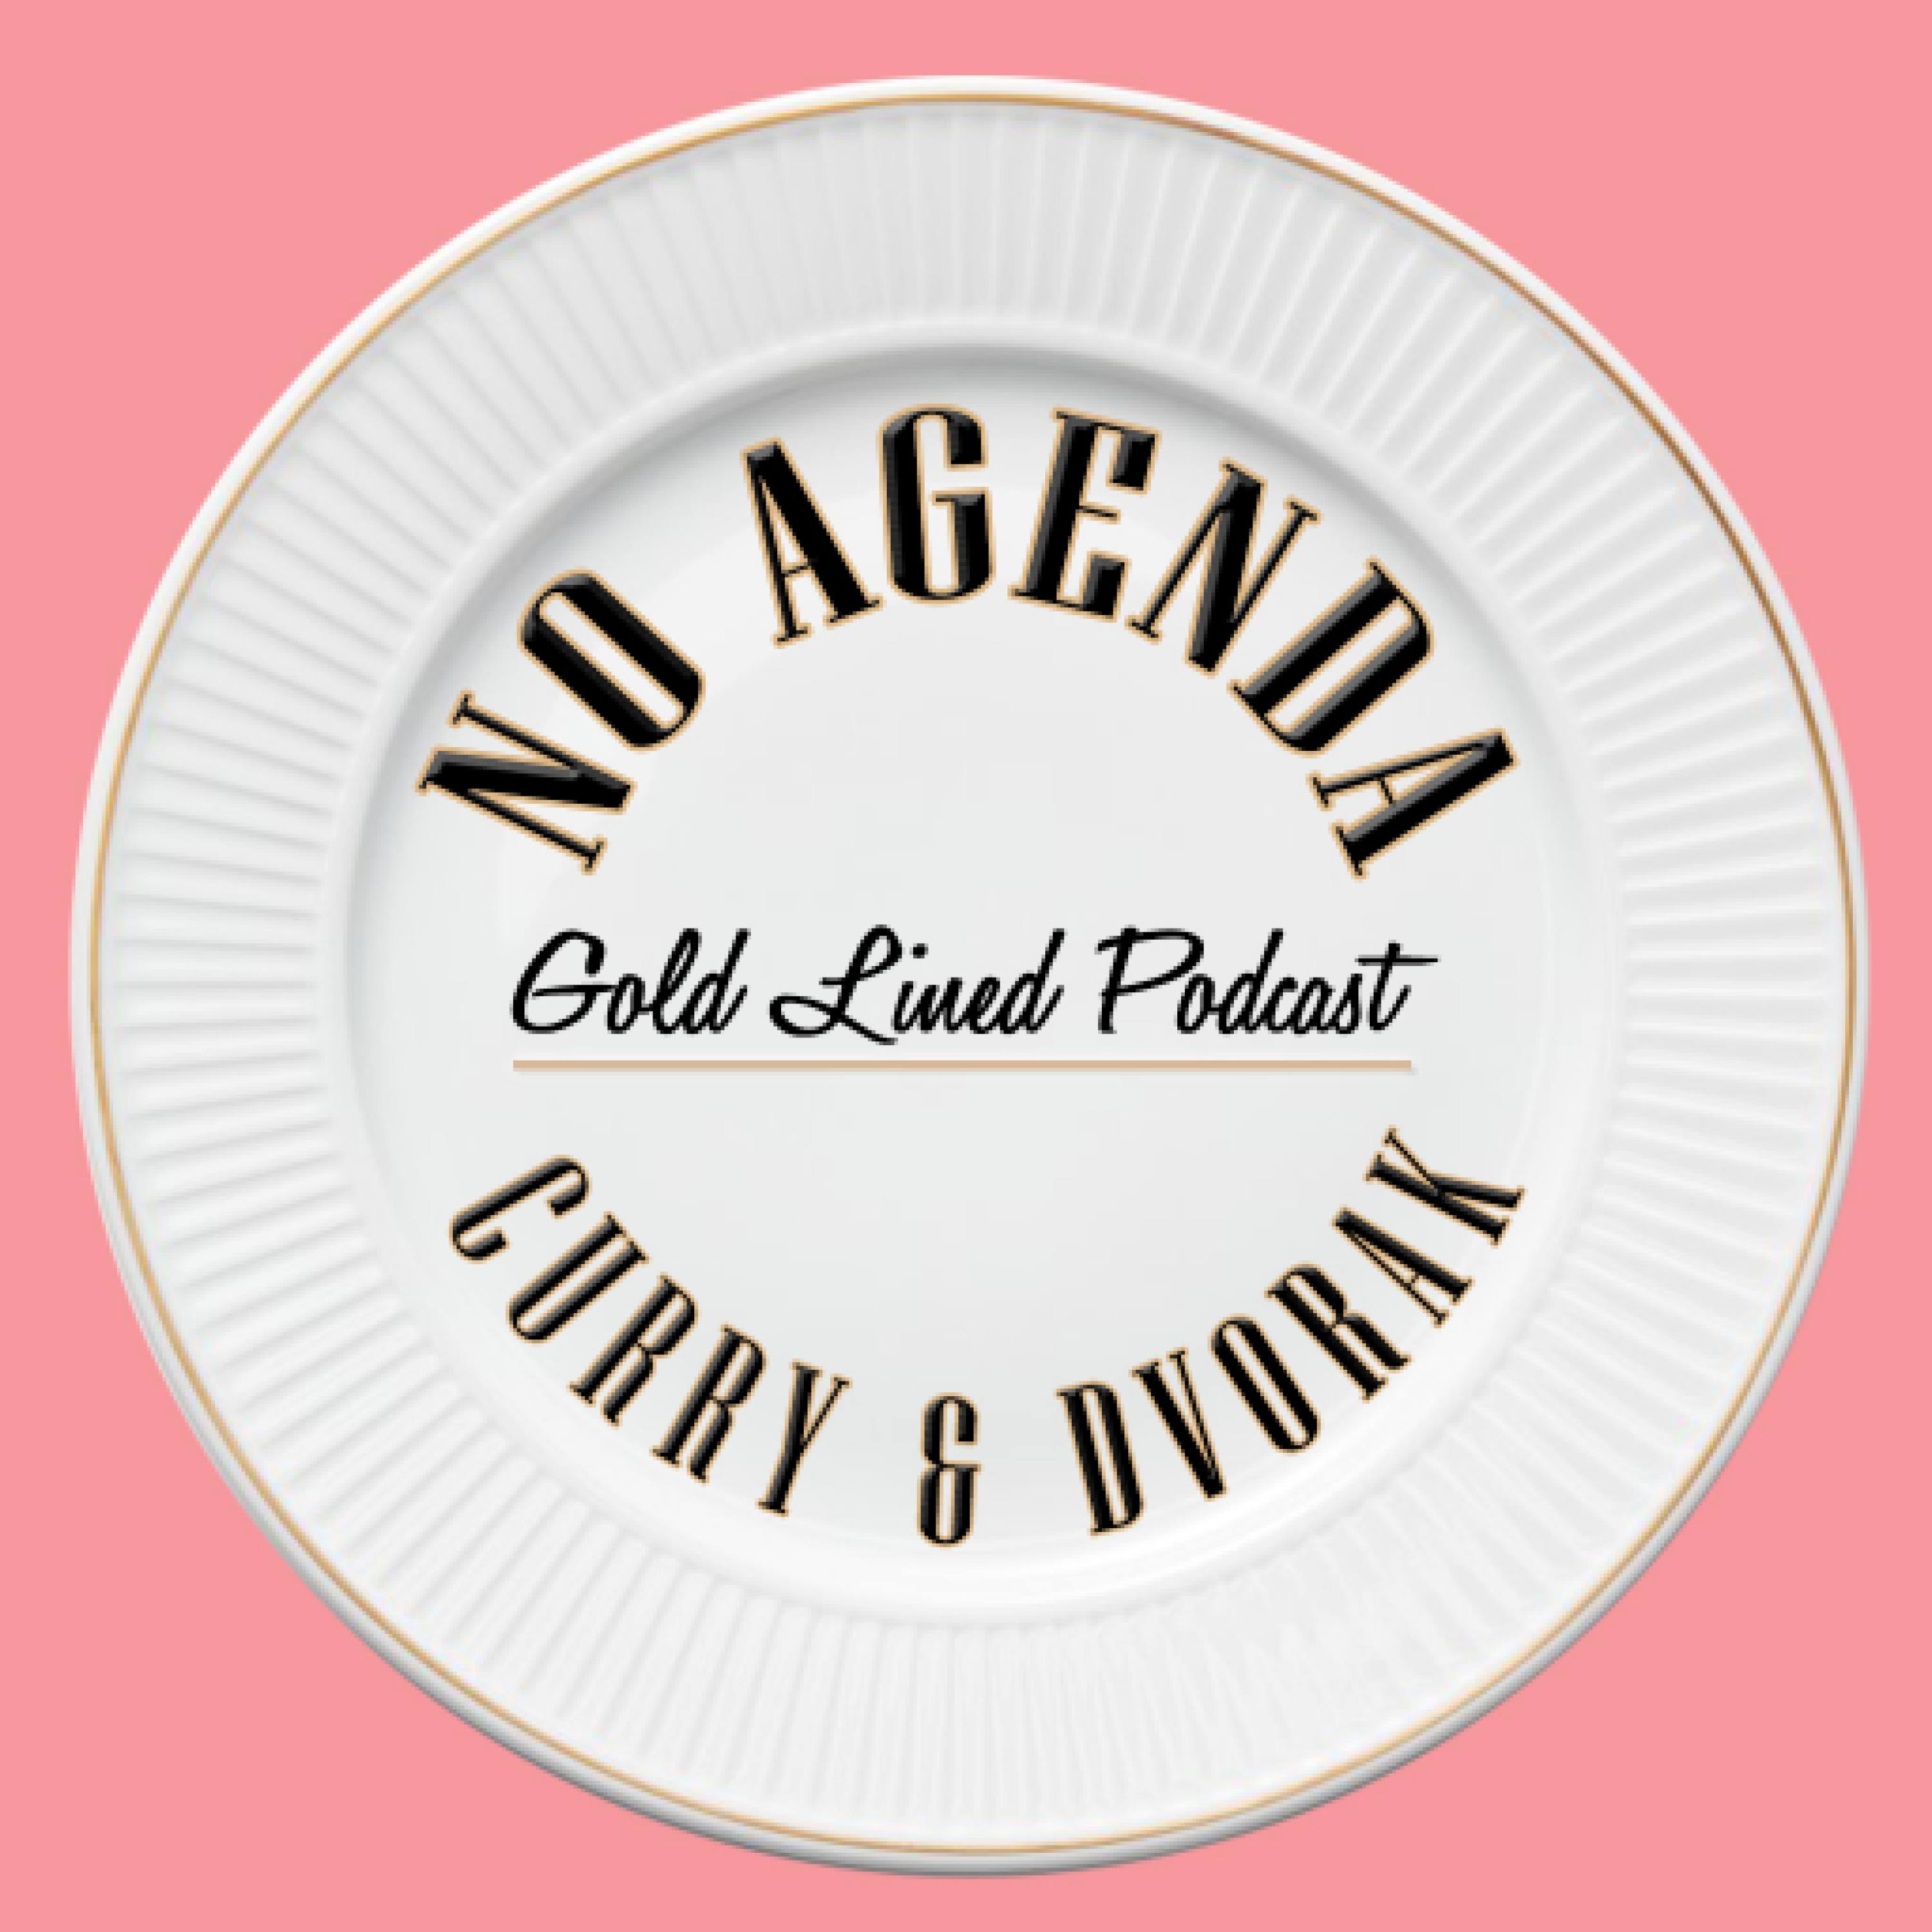 Gold Lined Podcast by nessworks for 